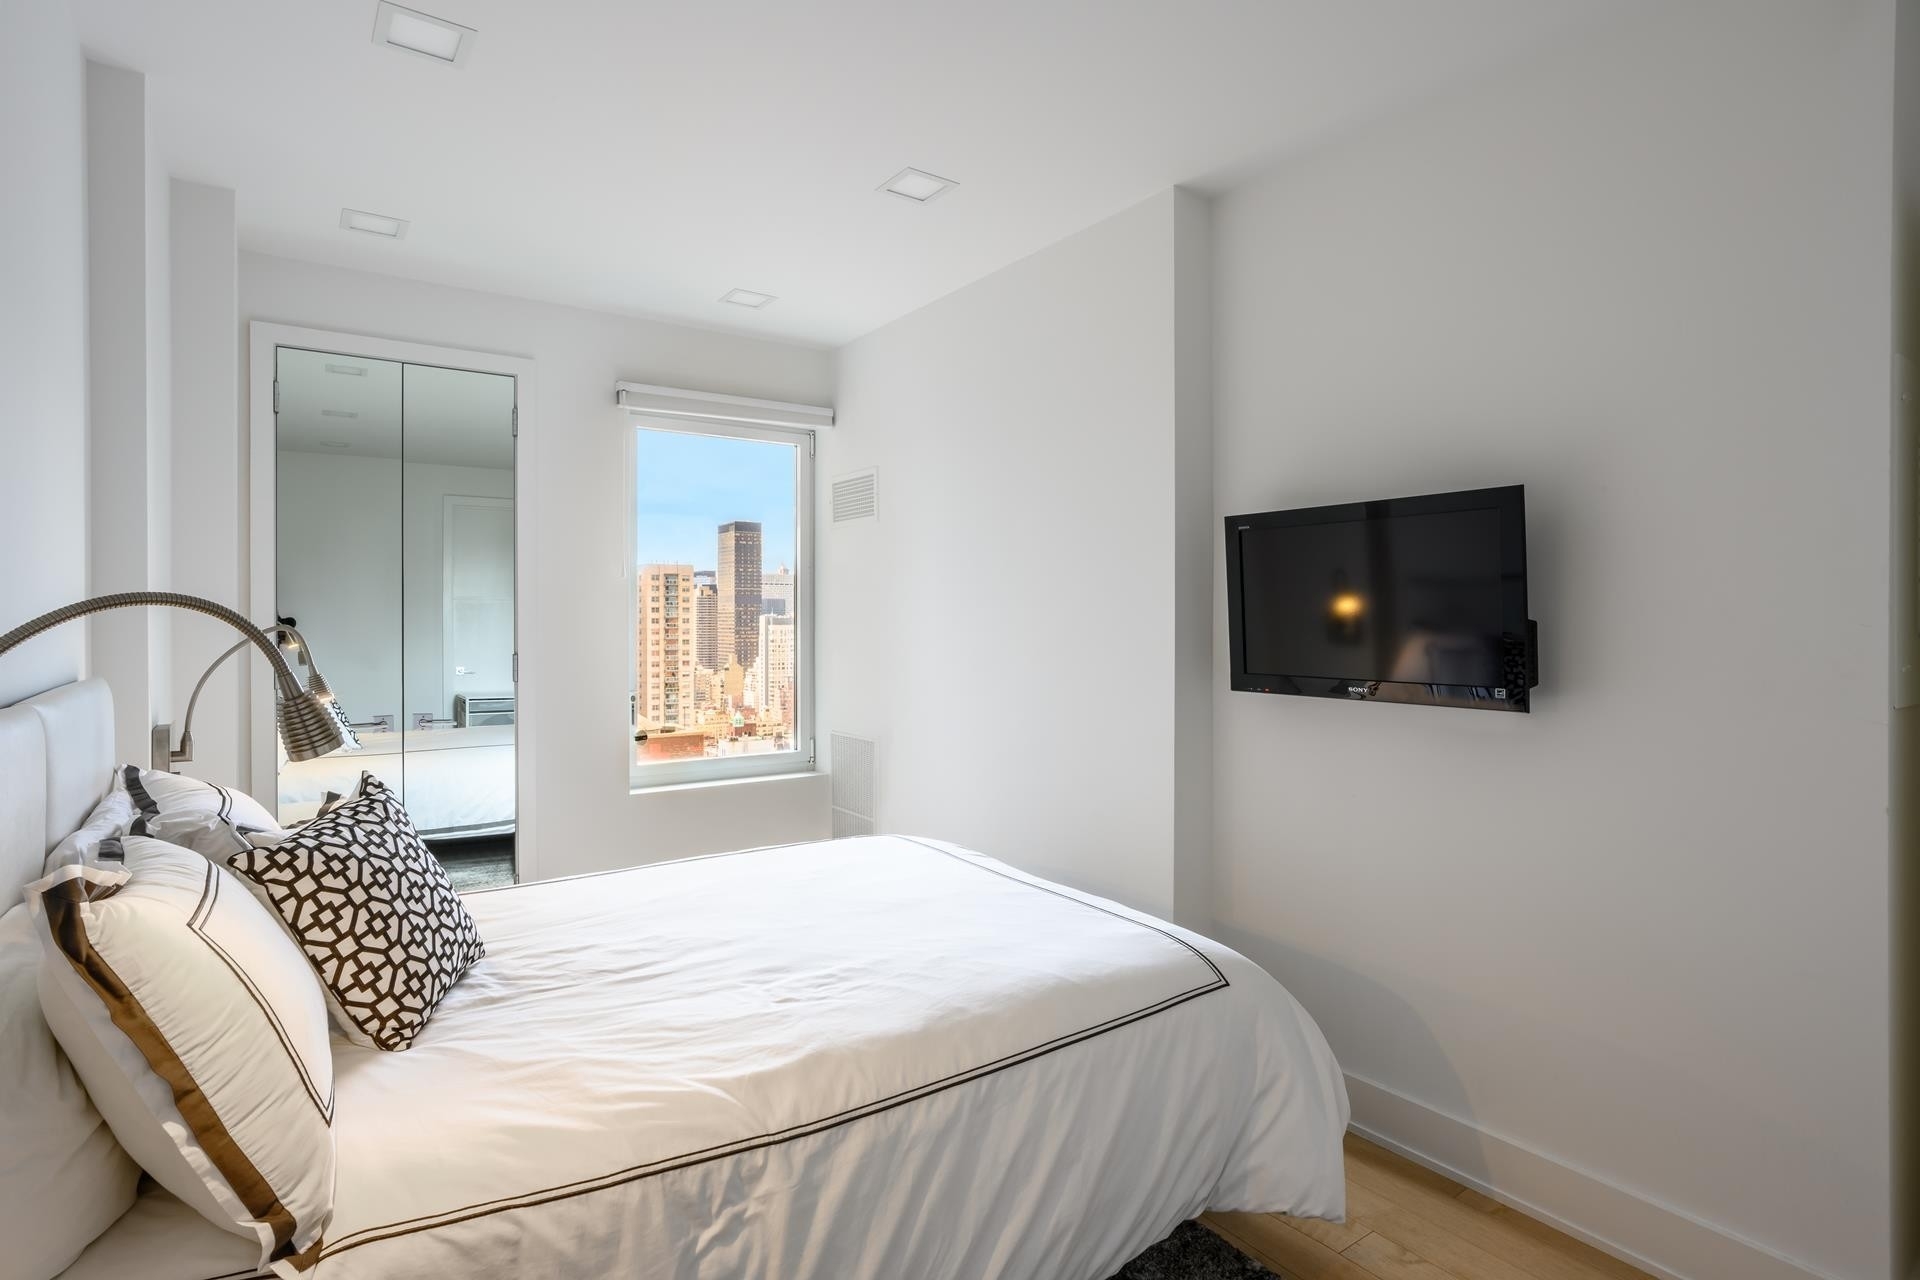 11. Co-op Properties for Sale at The Sovereign, 425 E 58TH ST, 33A Sutton Place, New York, New York 10022